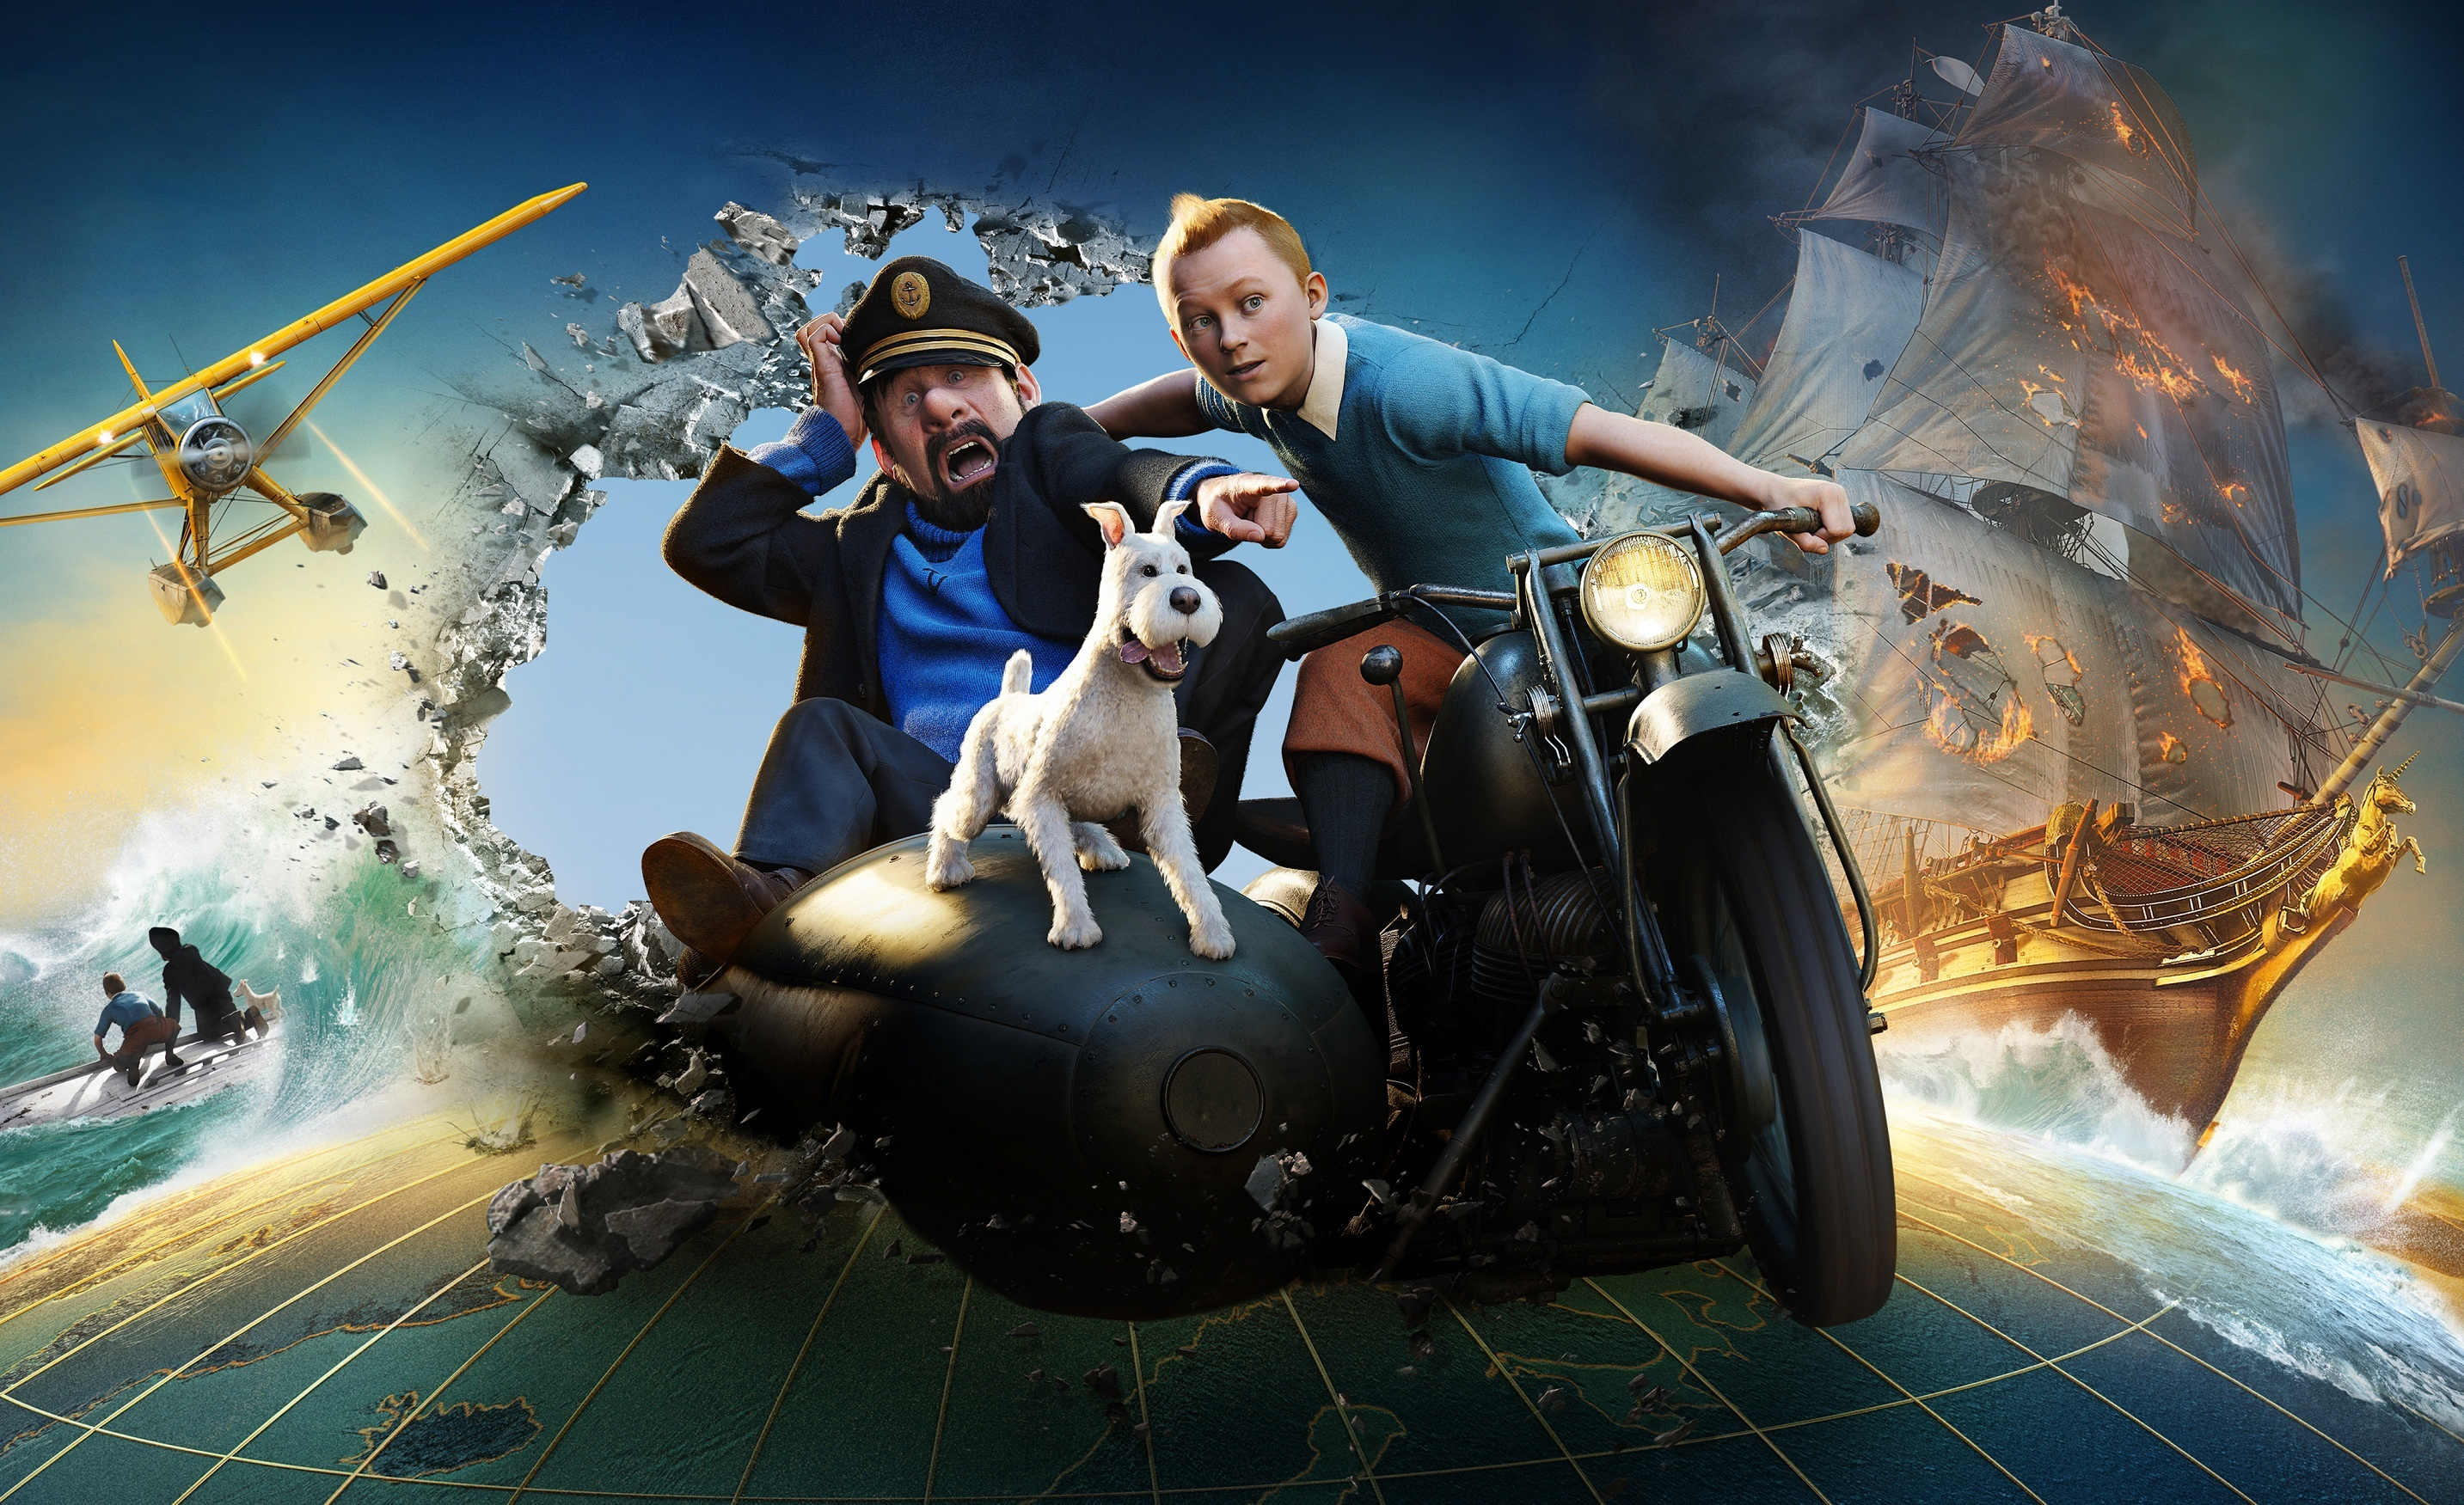 2866x1751 10+ The Adventures Of Tintin HD Wallpapers and Backgrounds